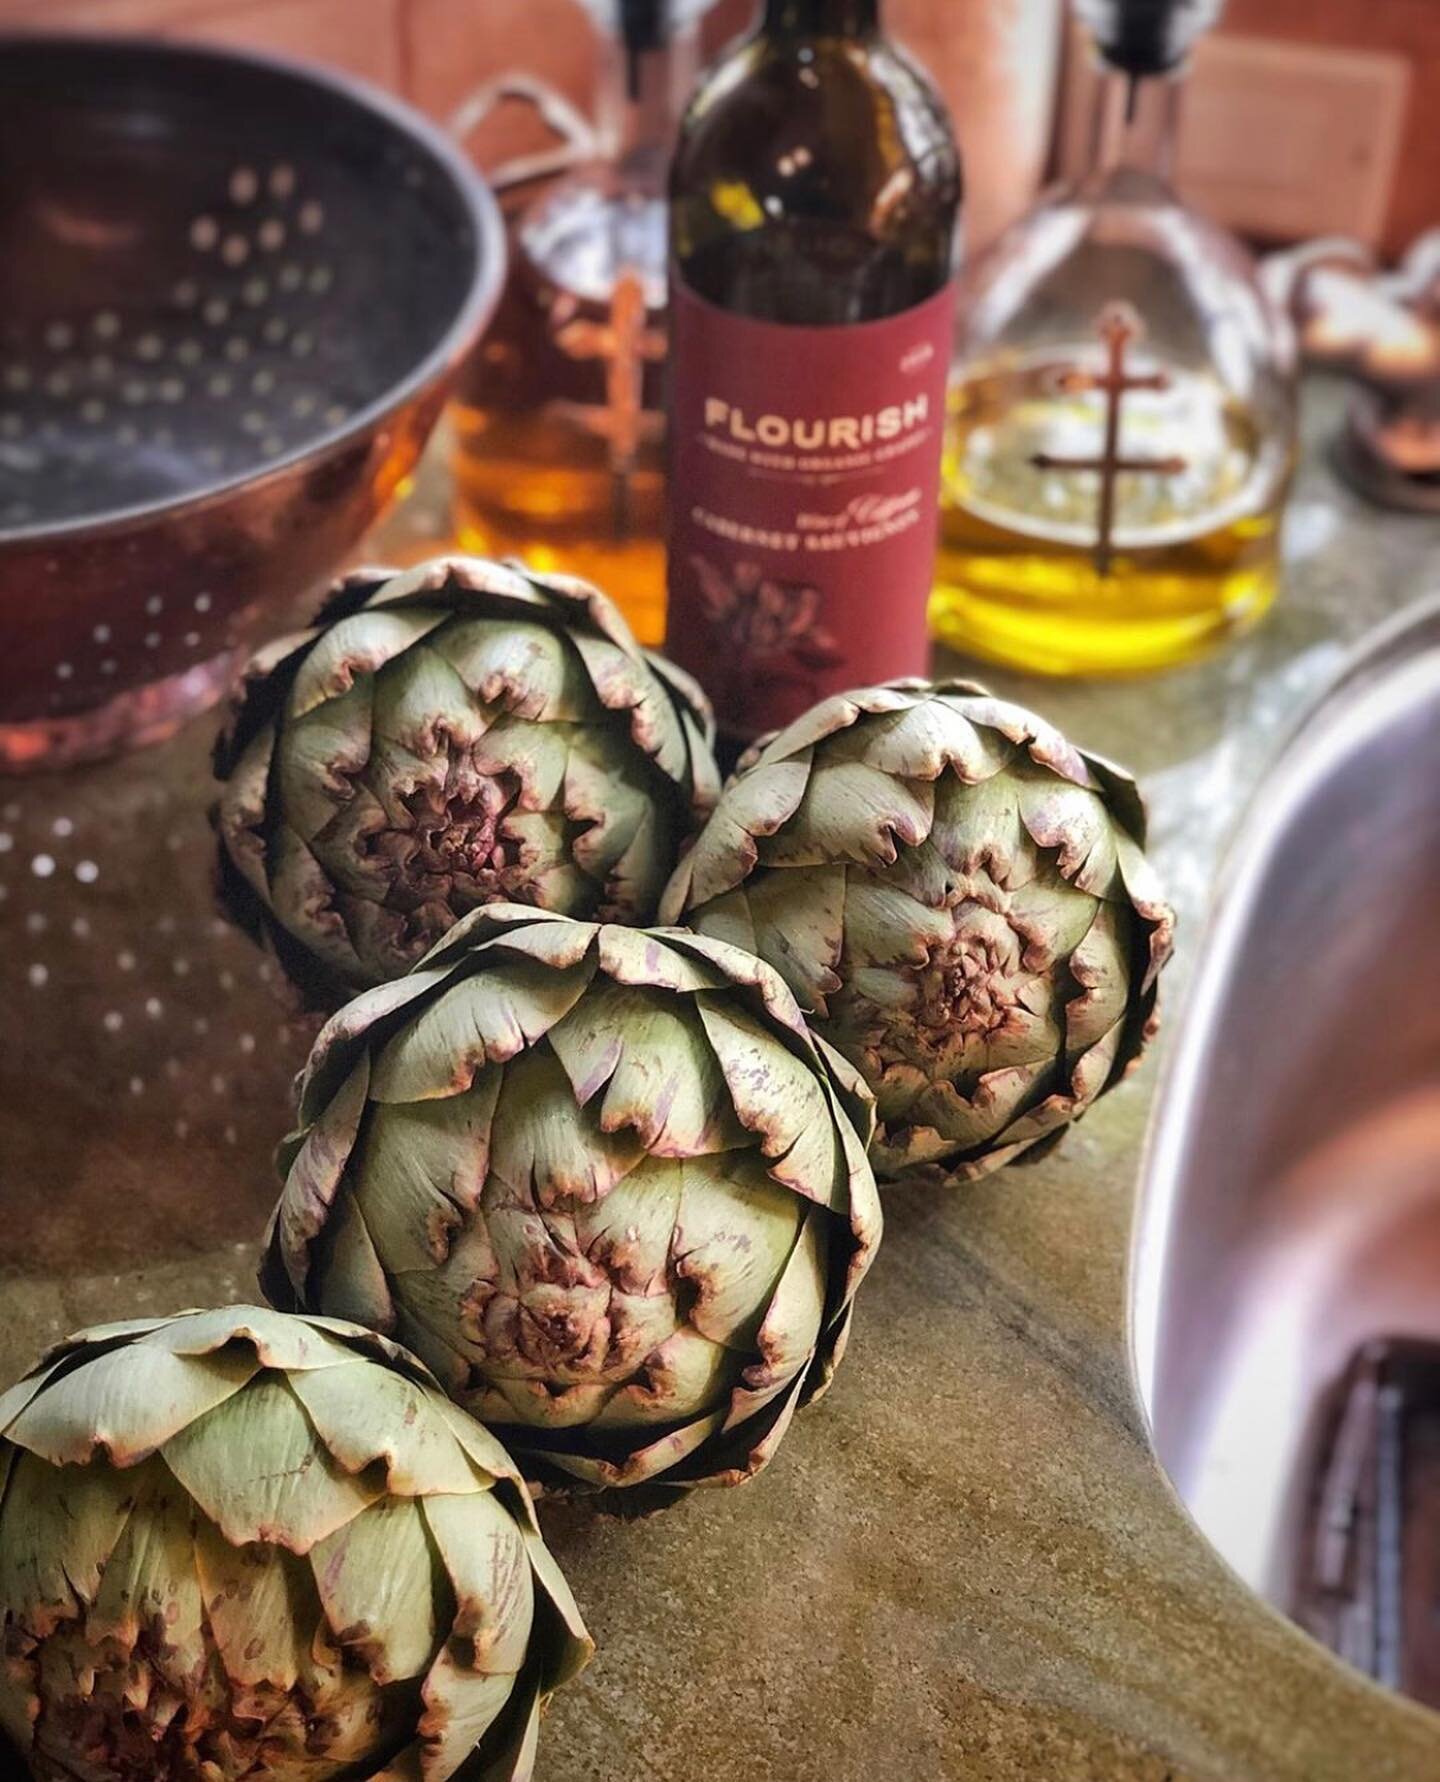 She Mentioned Artichokes &bull; Quiet day at our castle by the sea. A slash of white wine in the Lemon Garlic Aioli.... #artichokes #aioli  #artichoke #foodporn #foodie #food #artichokes #healthyfood #carciofi #foodphotography #dinner #vitaminb #vege